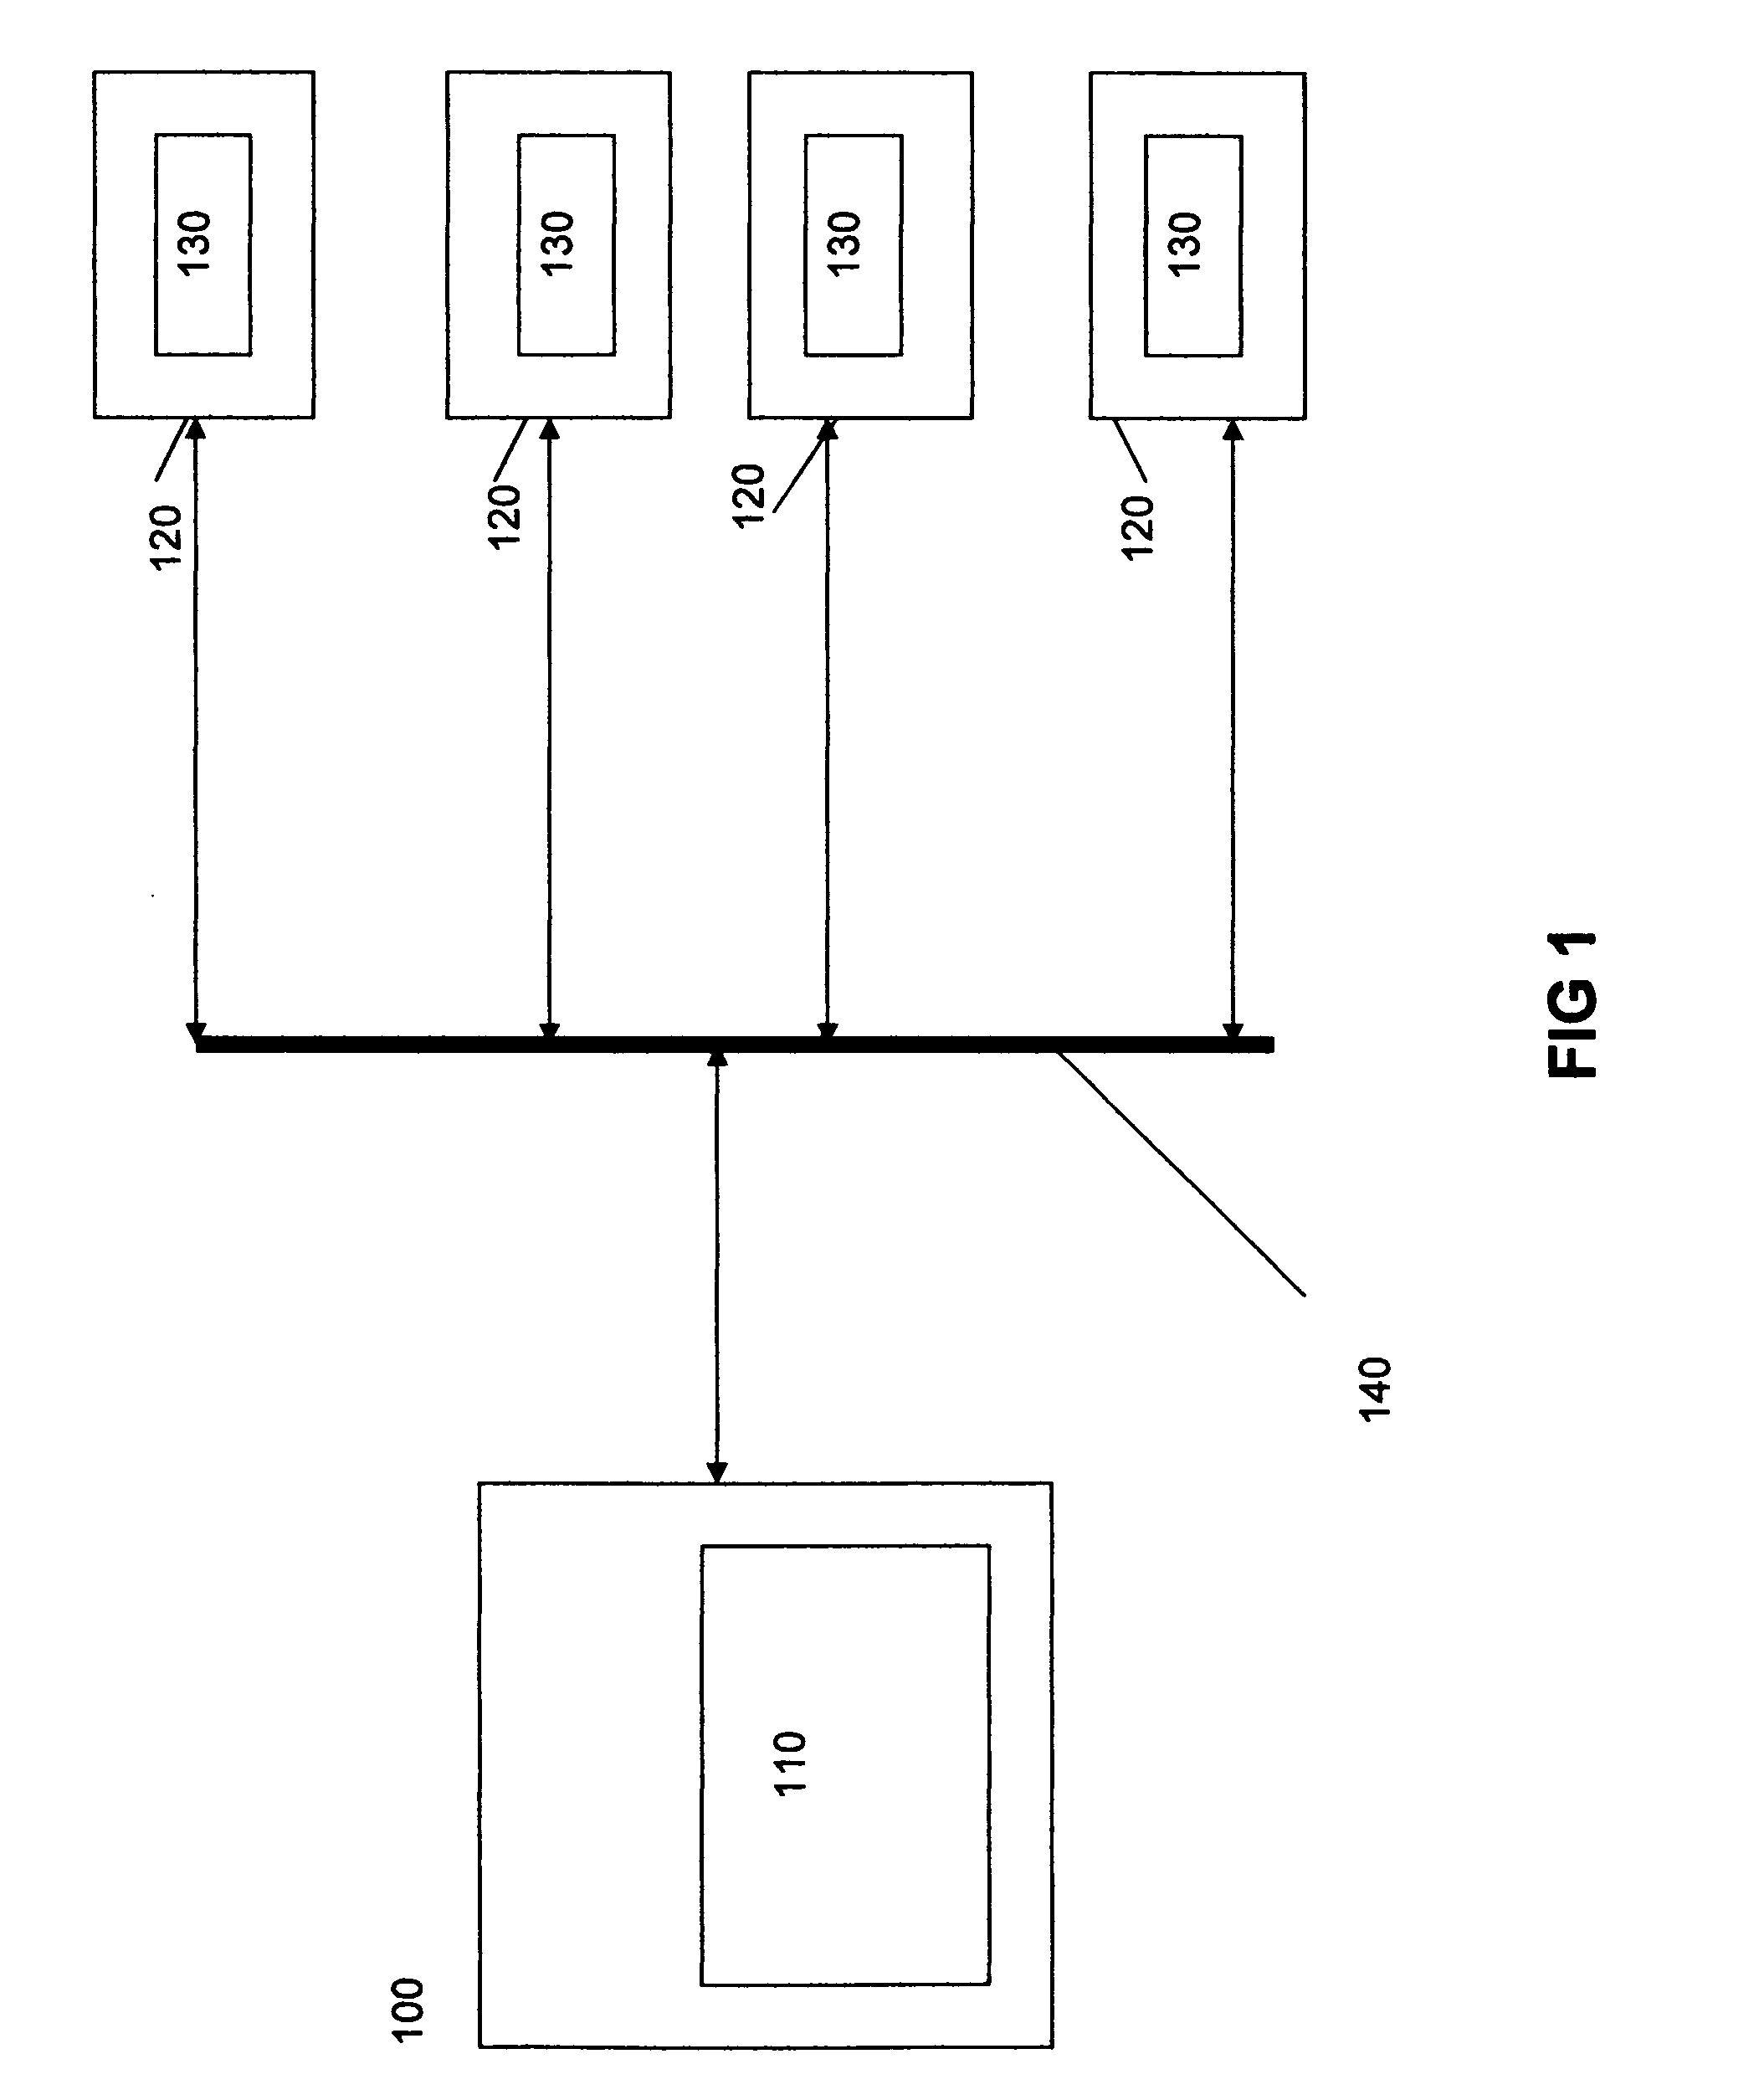 Systems and methods for detecting and preventing unauthorized access to networked devices